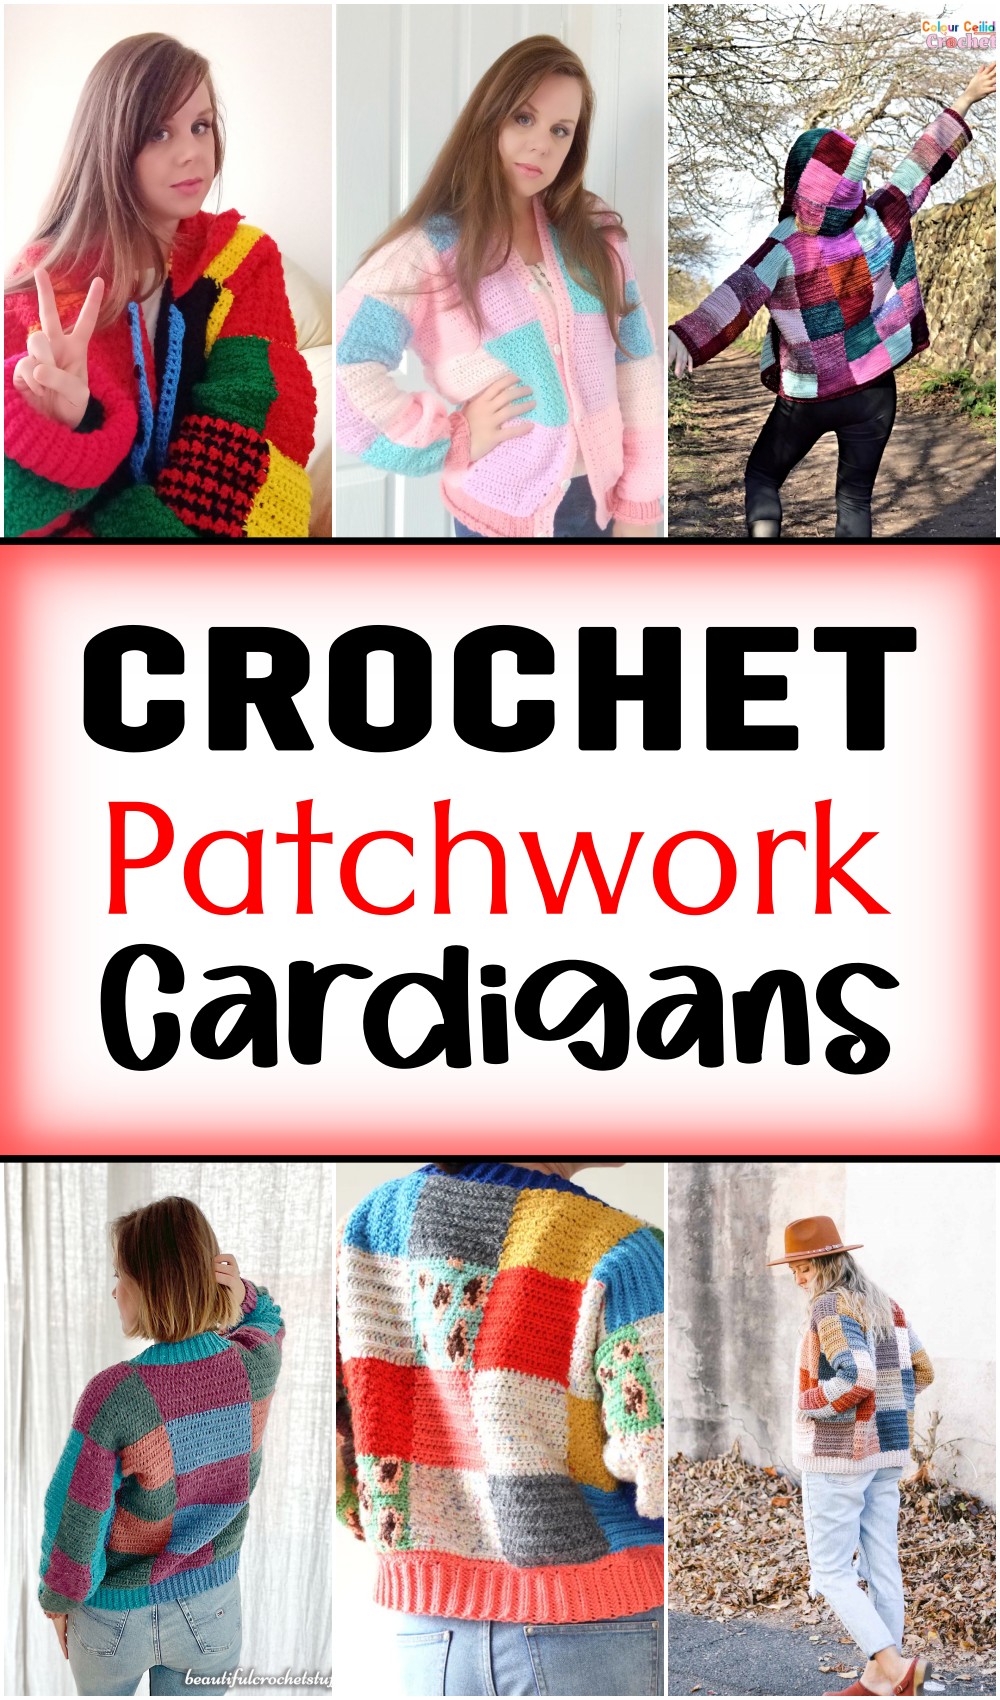 10 Crochet Patchwork Cardigan Patterns To Stay Warm